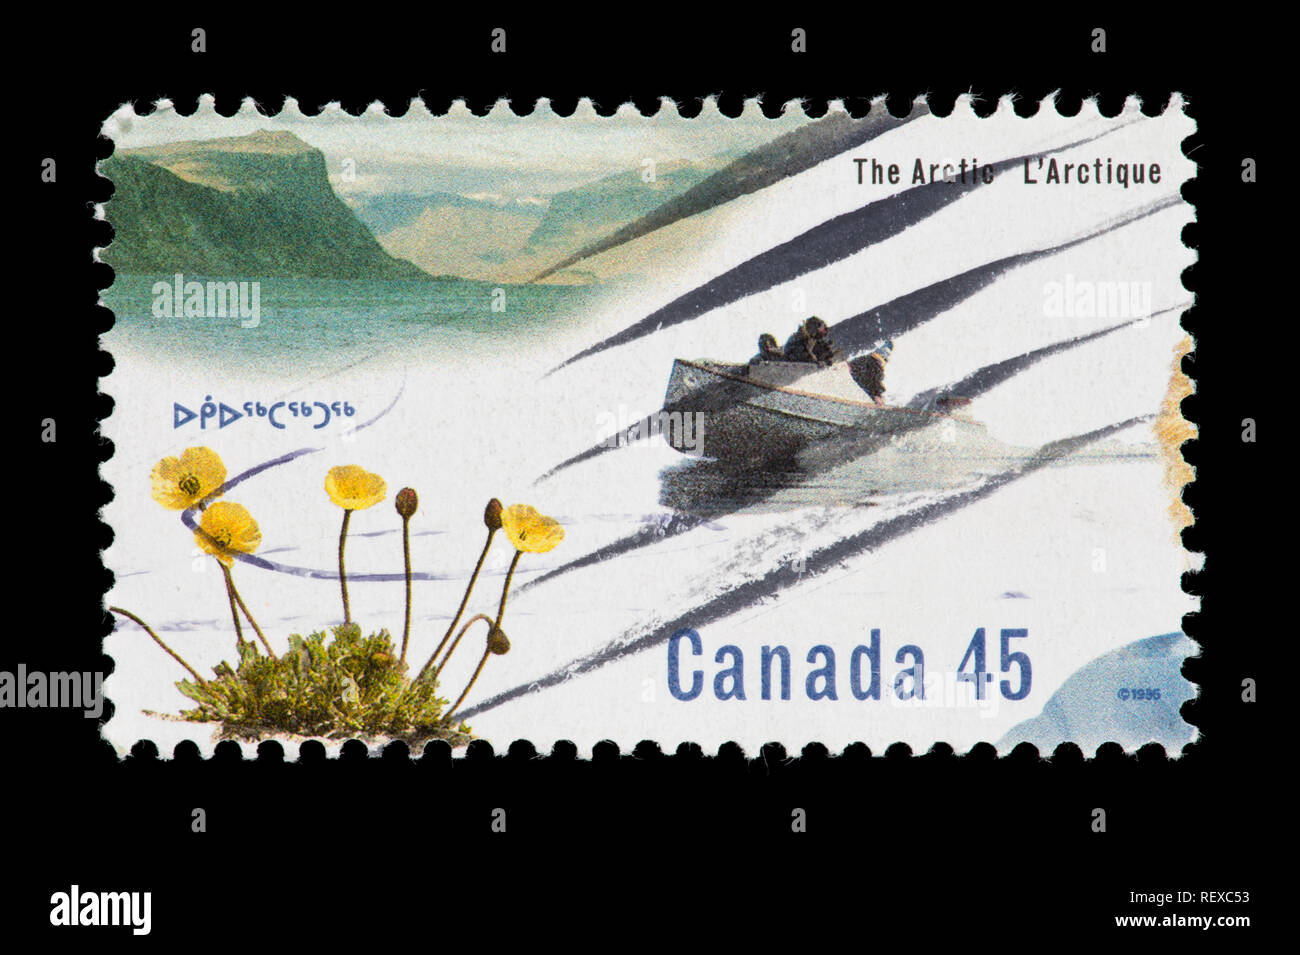 Postage stamp from Canada depicting an Arctic poppy and cargo canoe Stock Photo